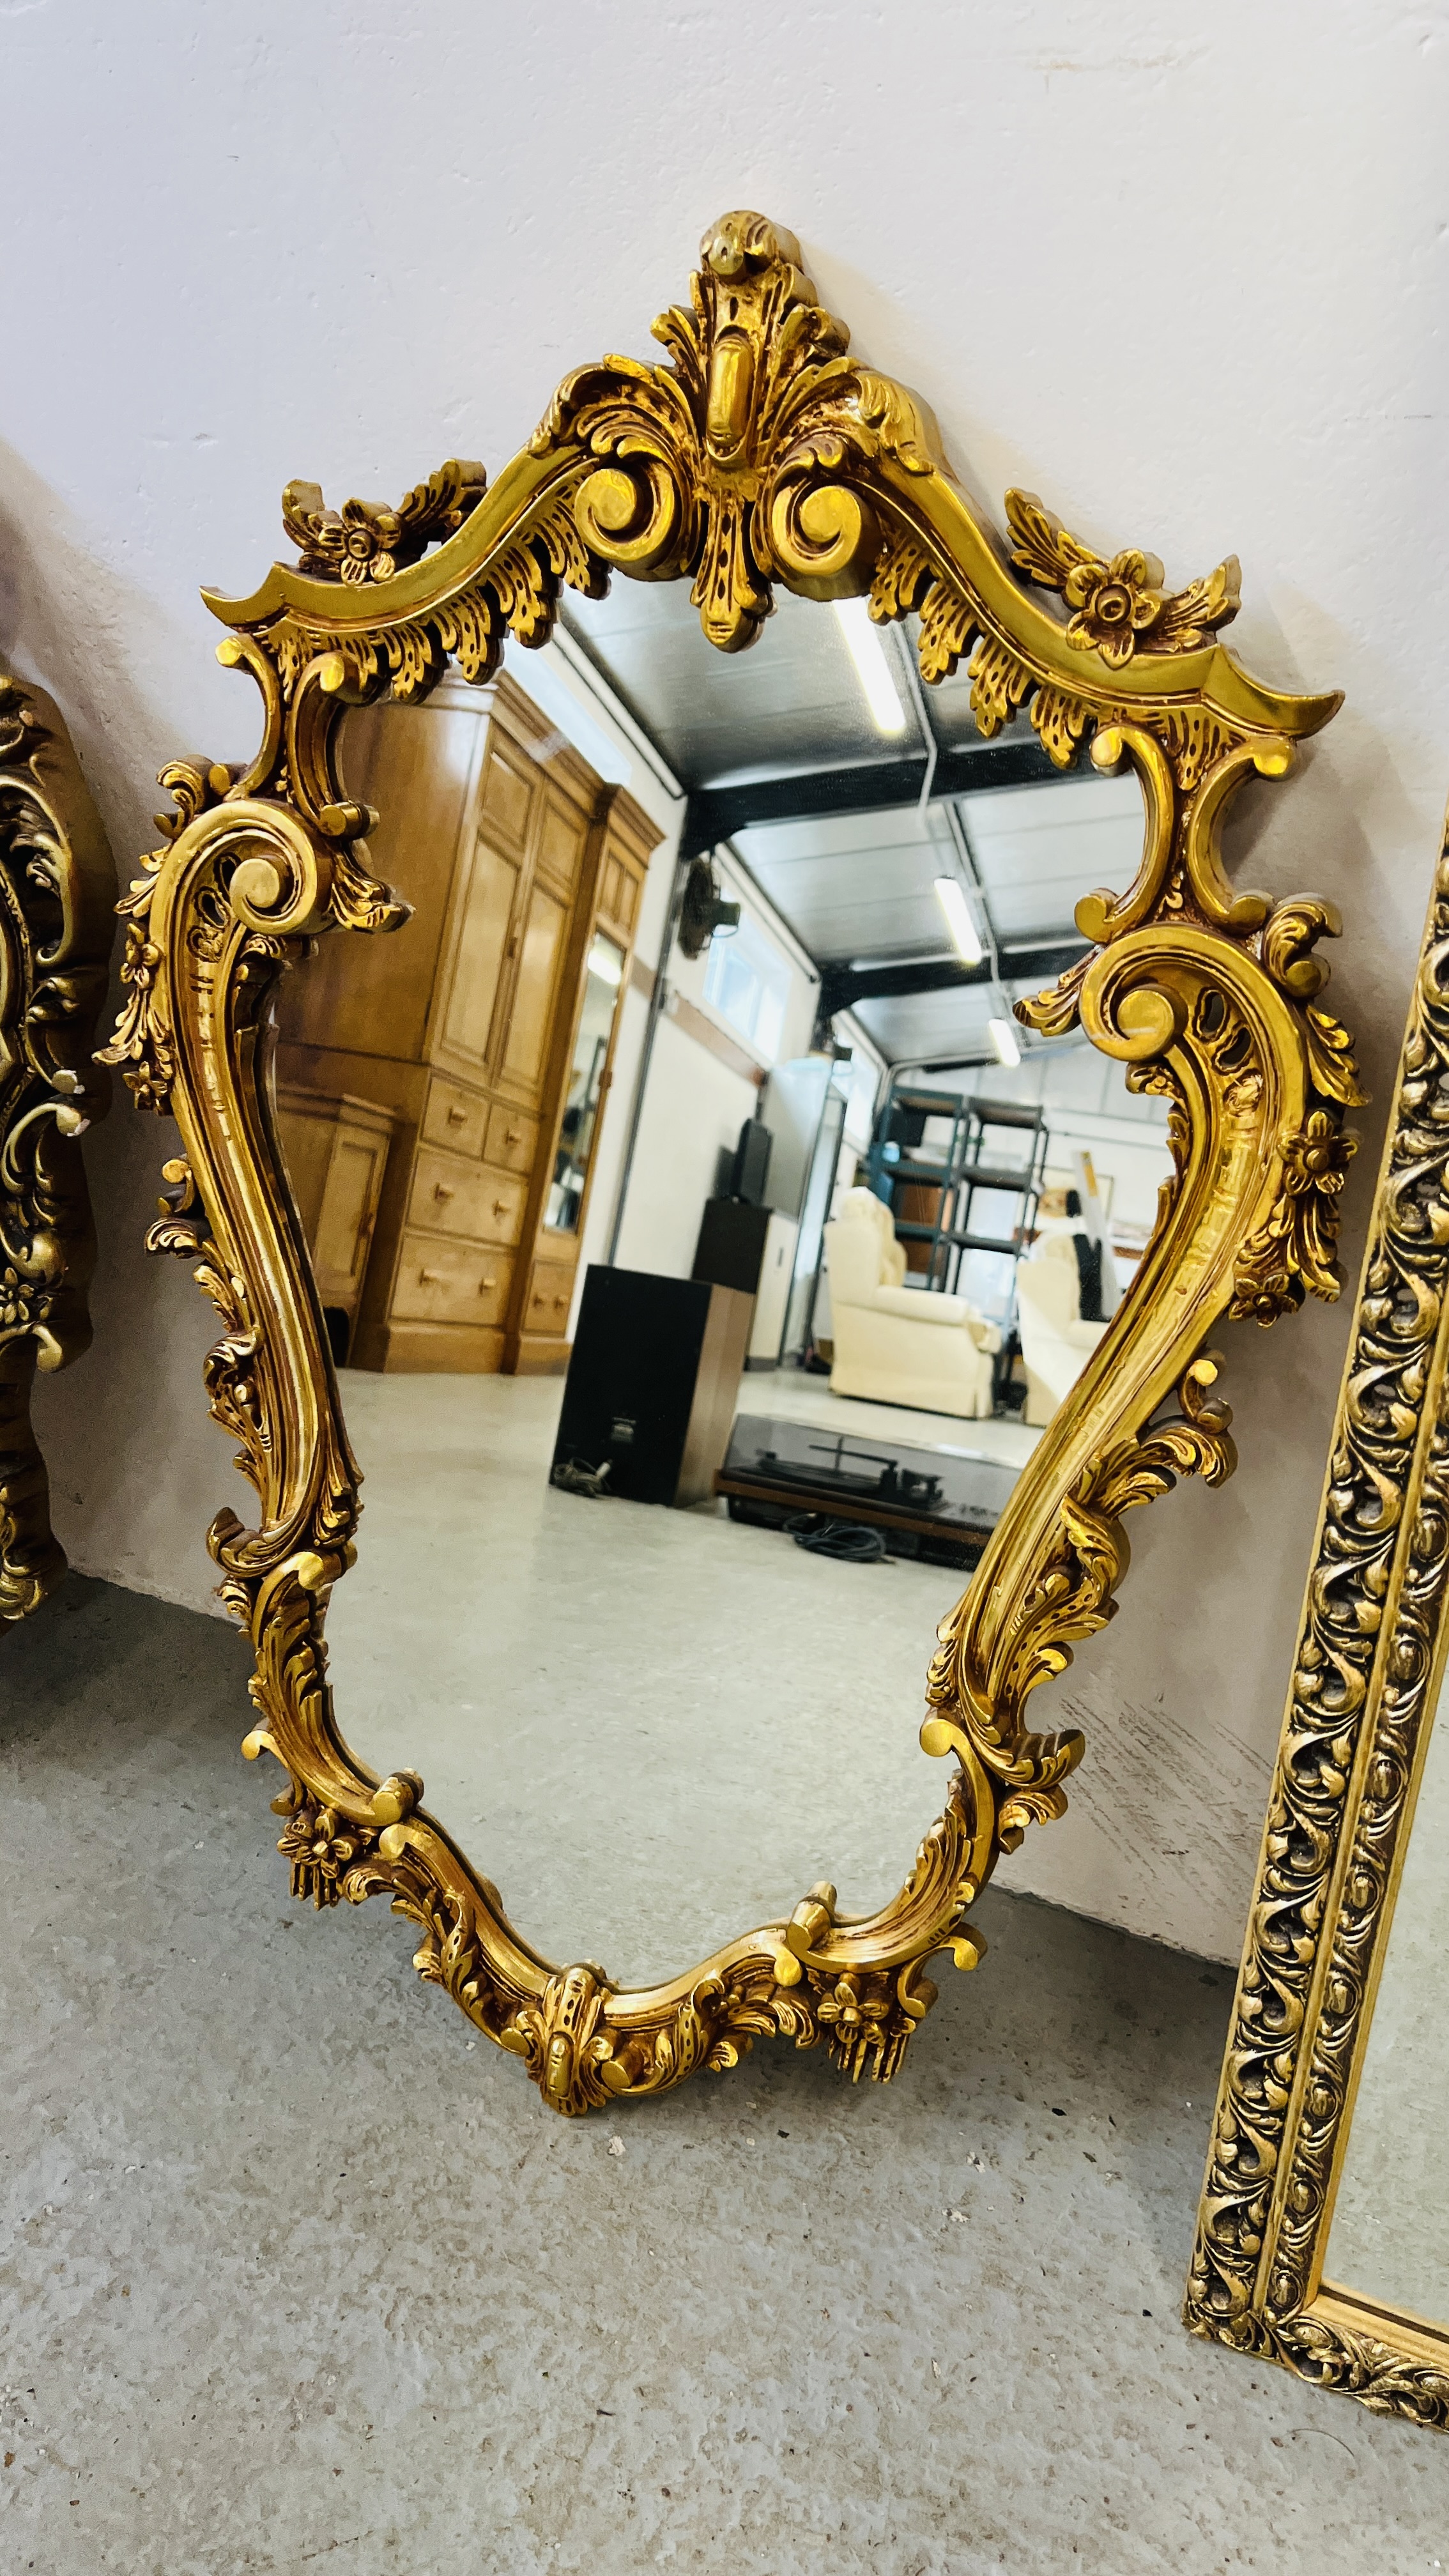 FOUR ORNATE GILT FRAMED DECORATIVE WALL MIRRORS OF VARIOUS DESIGNS - Image 2 of 6